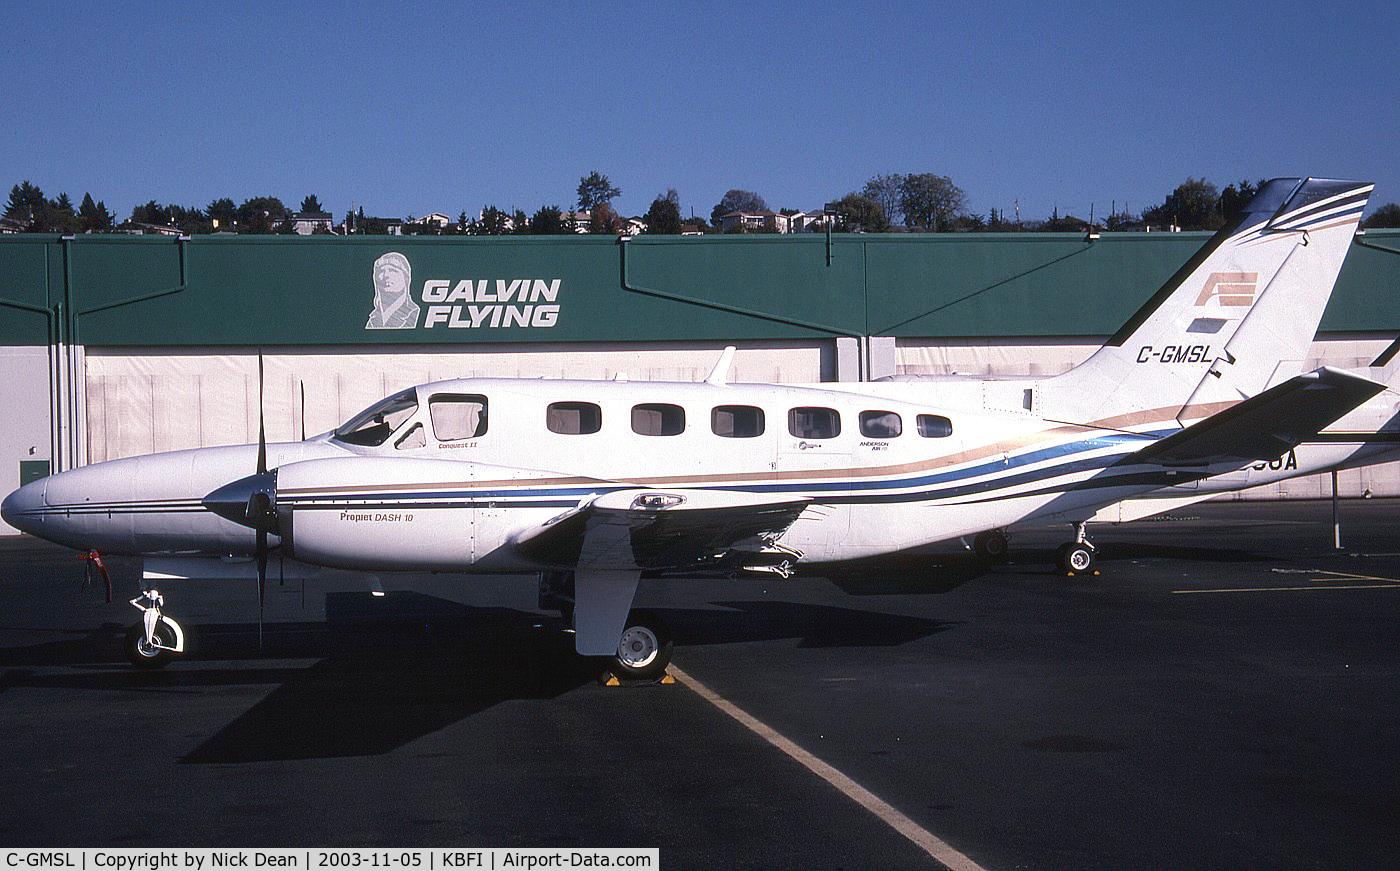 C-GMSL, 1981 Cessna 441 Conquest II C/N 441-0245, KBFI (Seen here as C-GMSL this airframe is currently registered N441PG as posted)